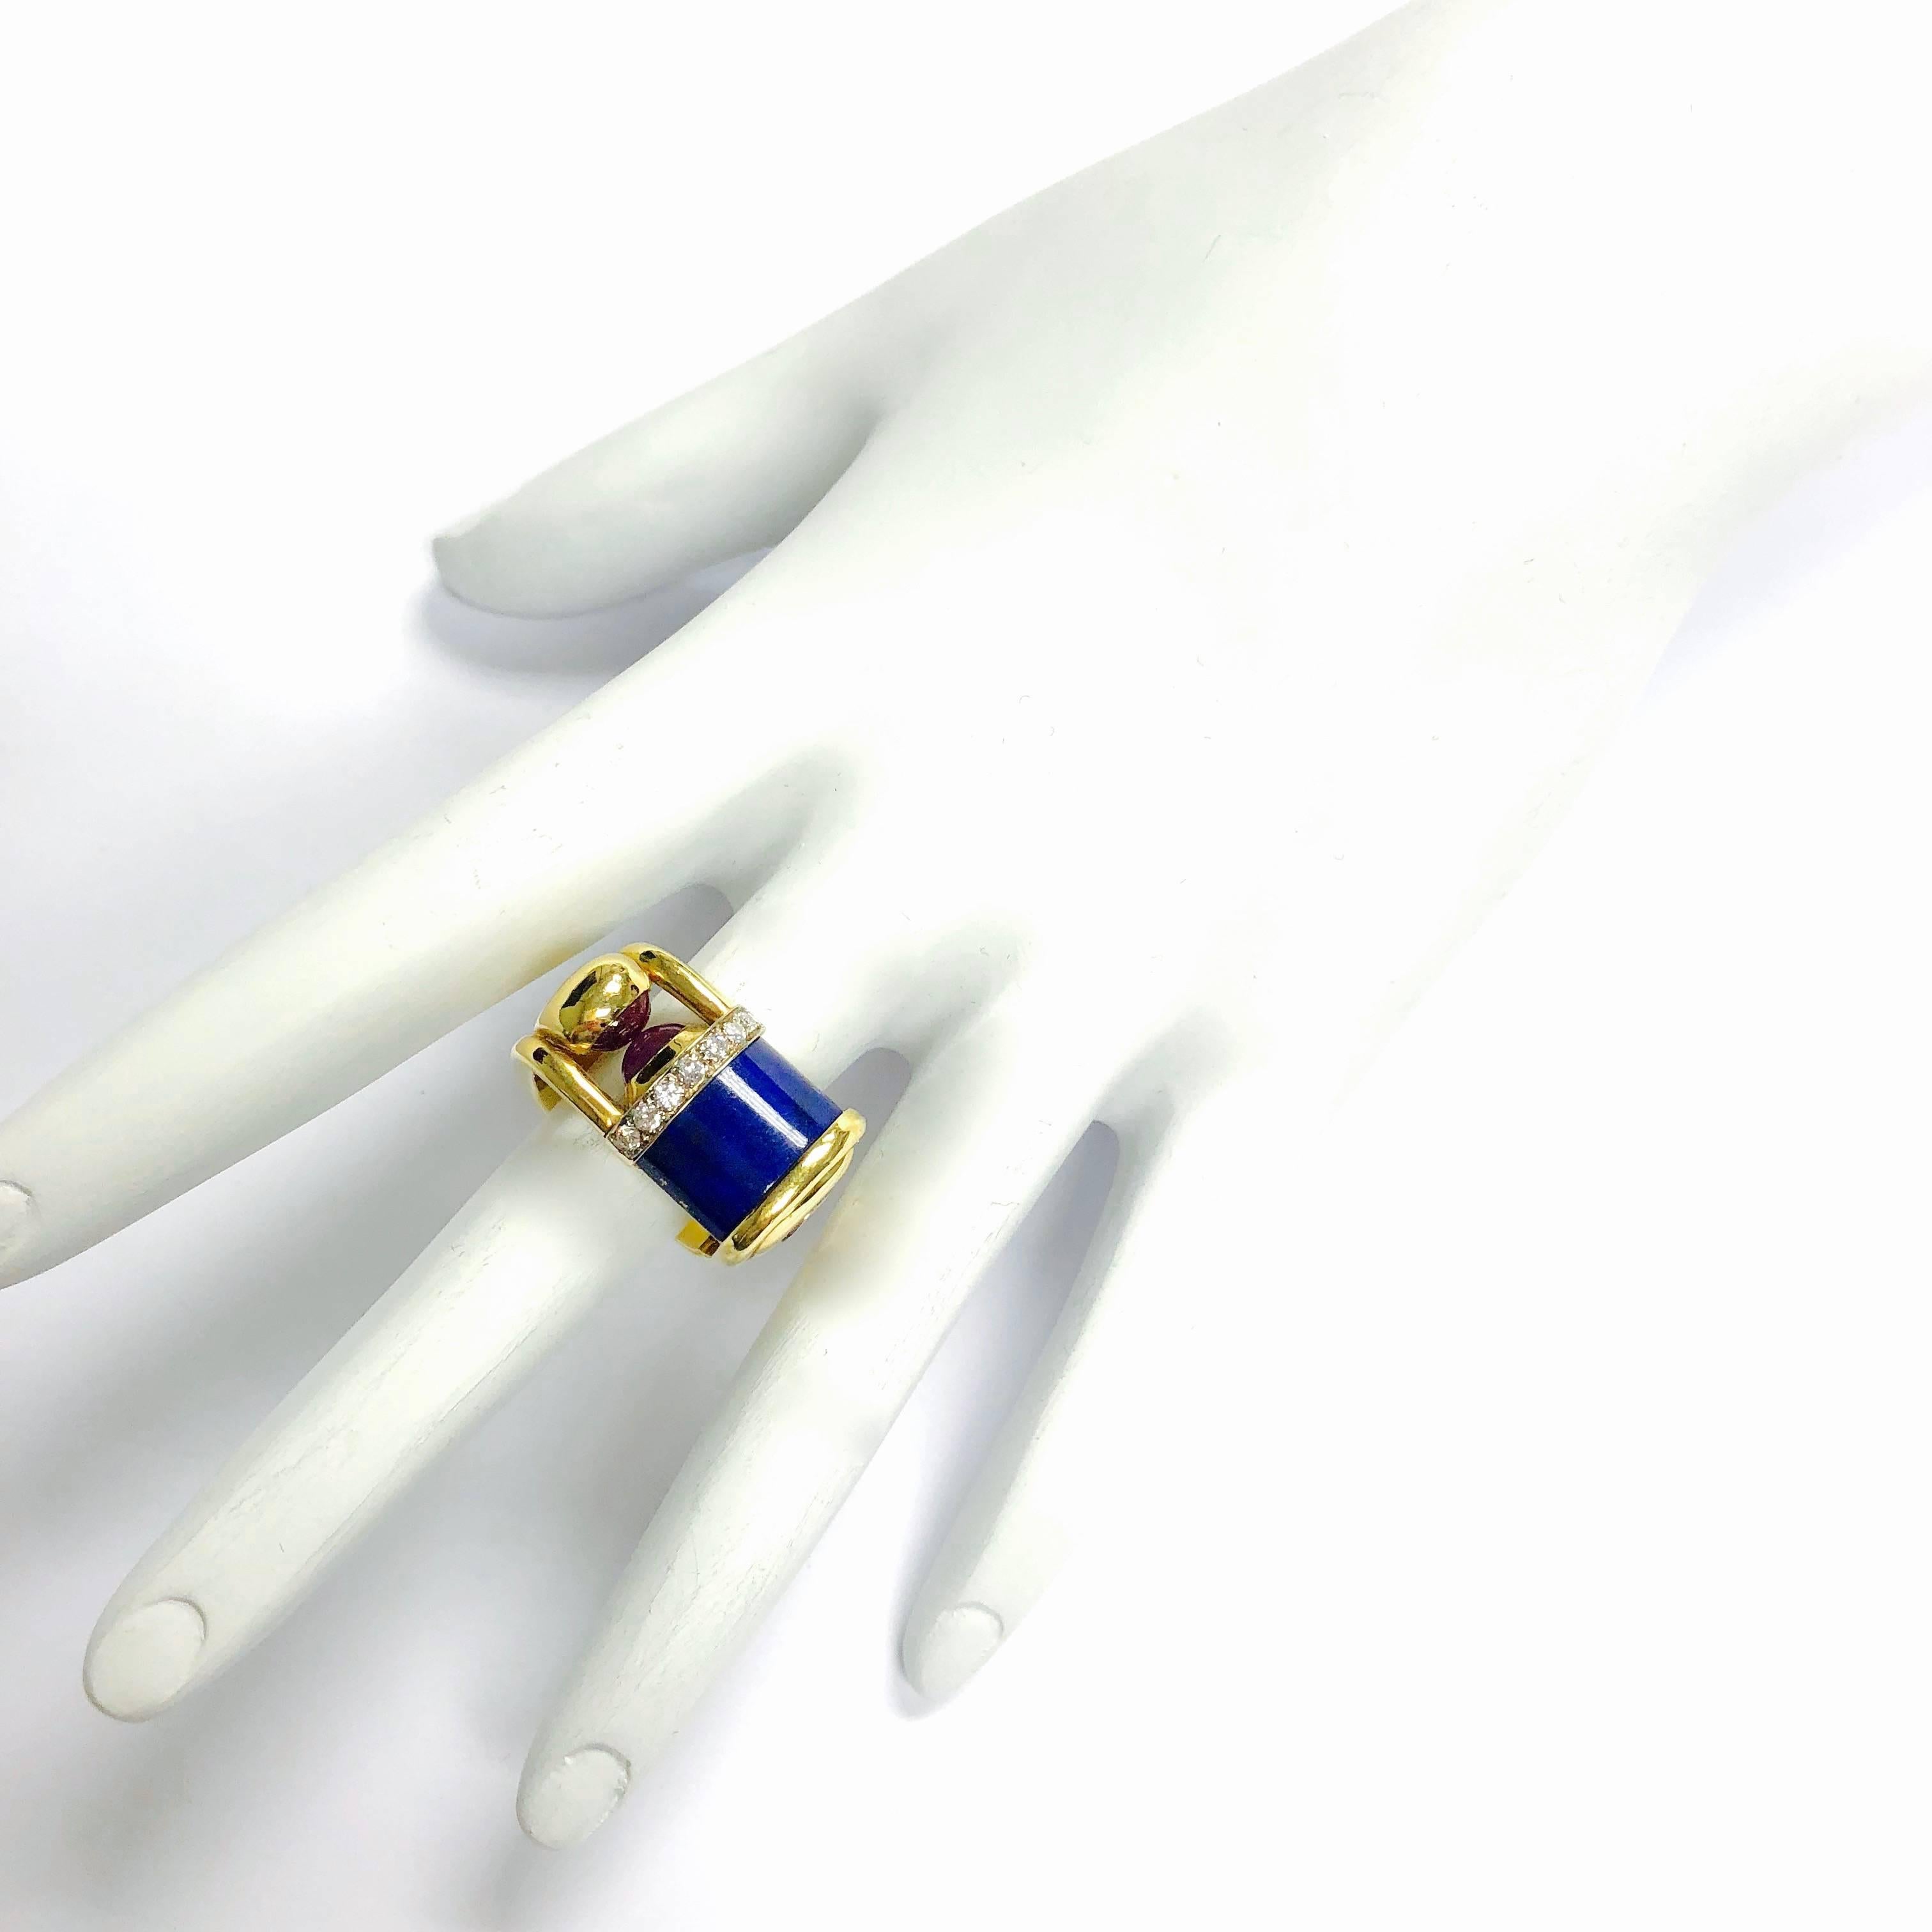 Women's or Men's Modernist Style Centoventuno Lapis Lazuli Diamond and Ruby Gold Ring